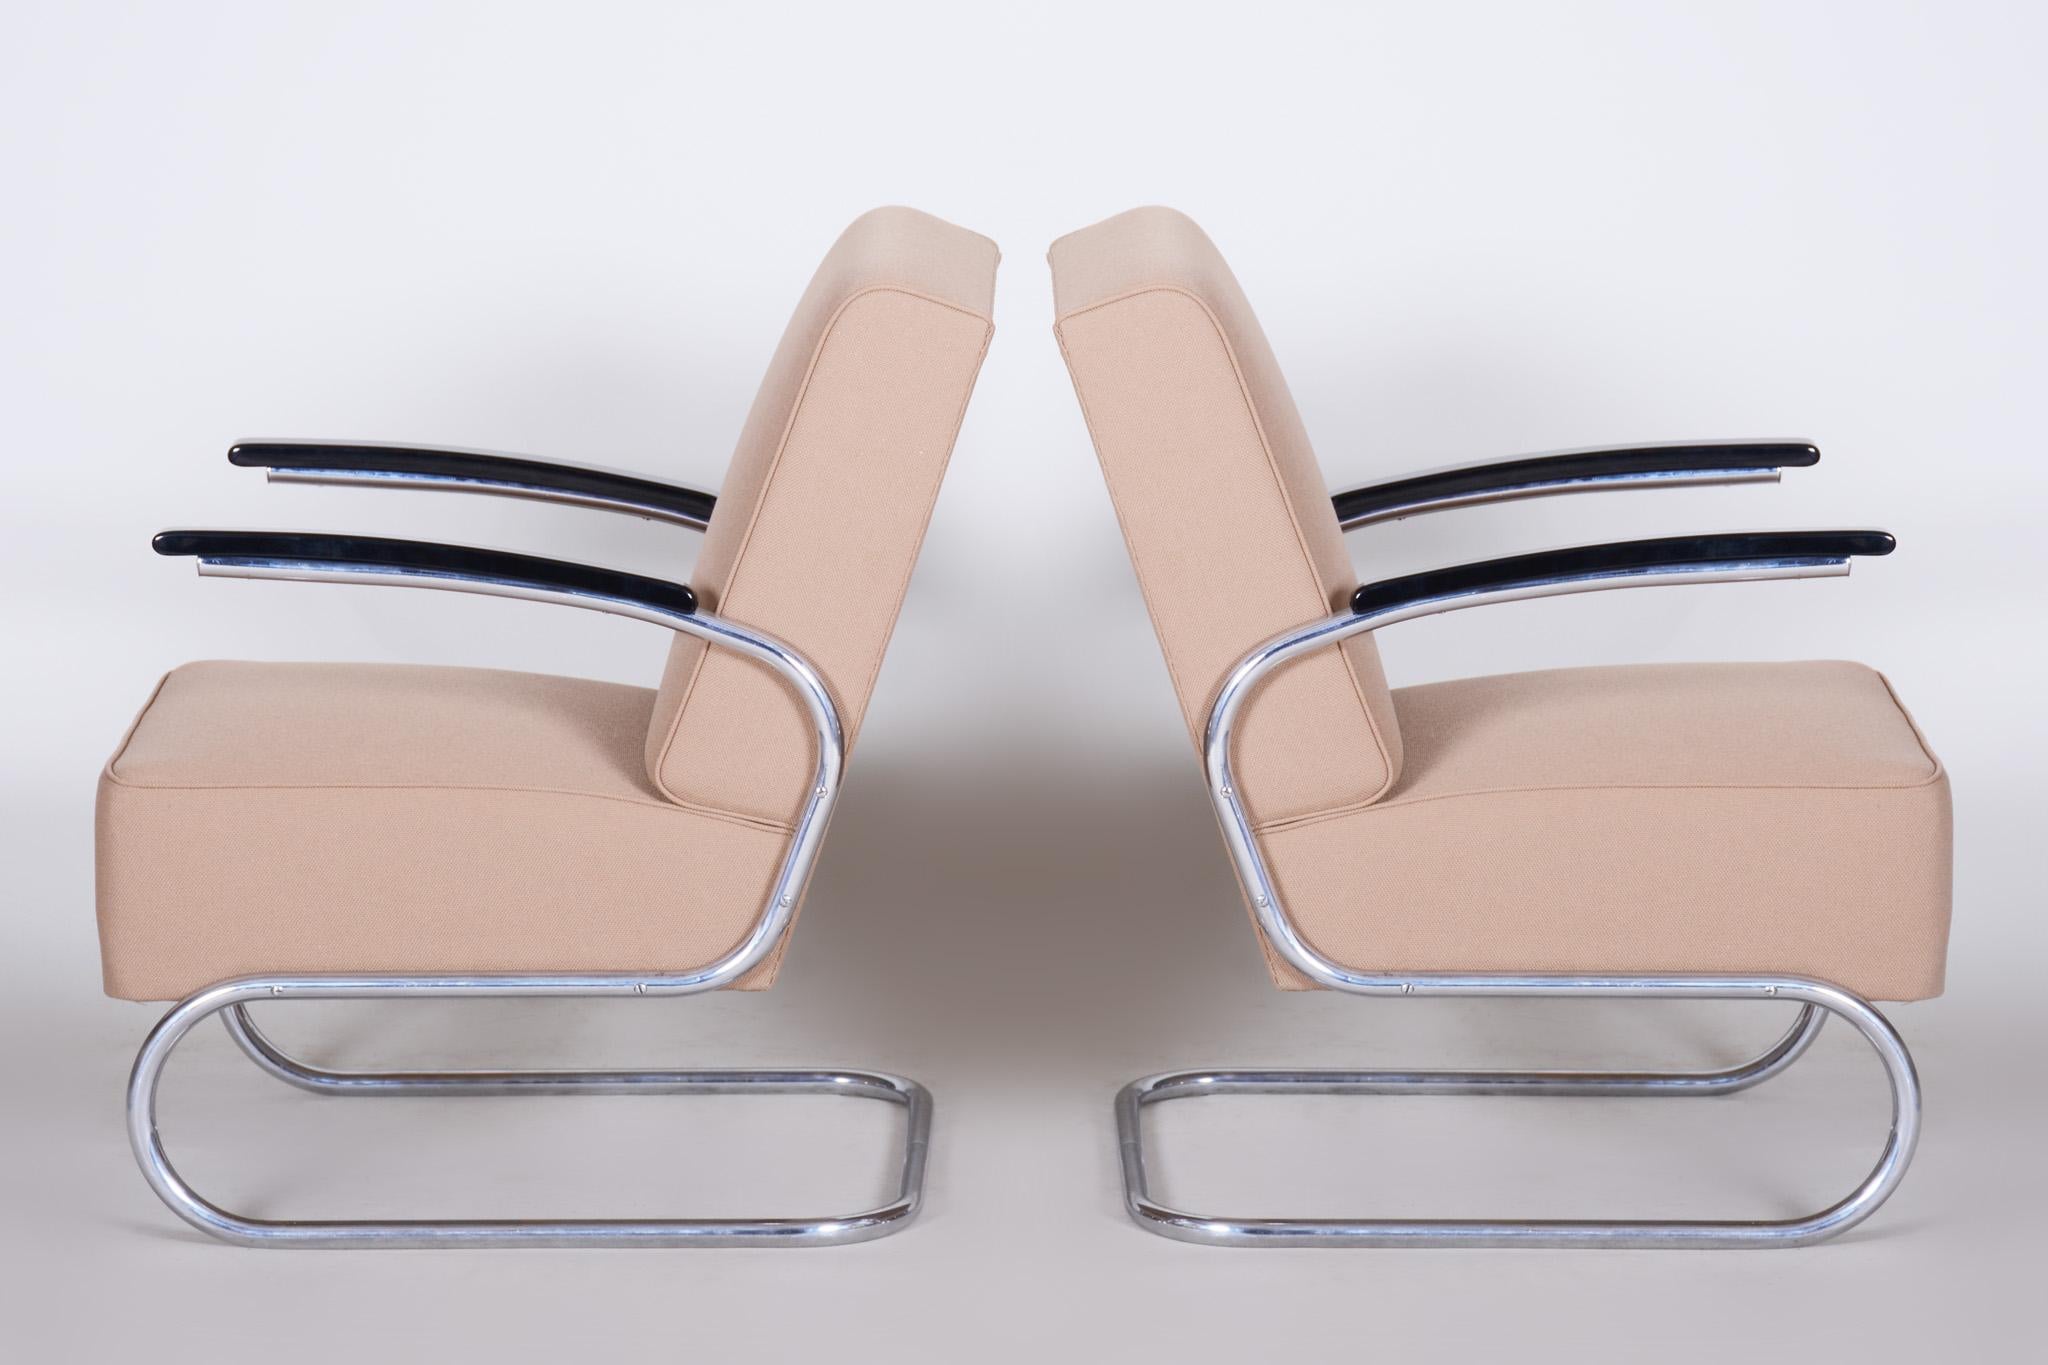 Fabric Chrome Bauhaus Armchairs Designed by Mücke Melder, Fully Refurbished, 1930s For Sale